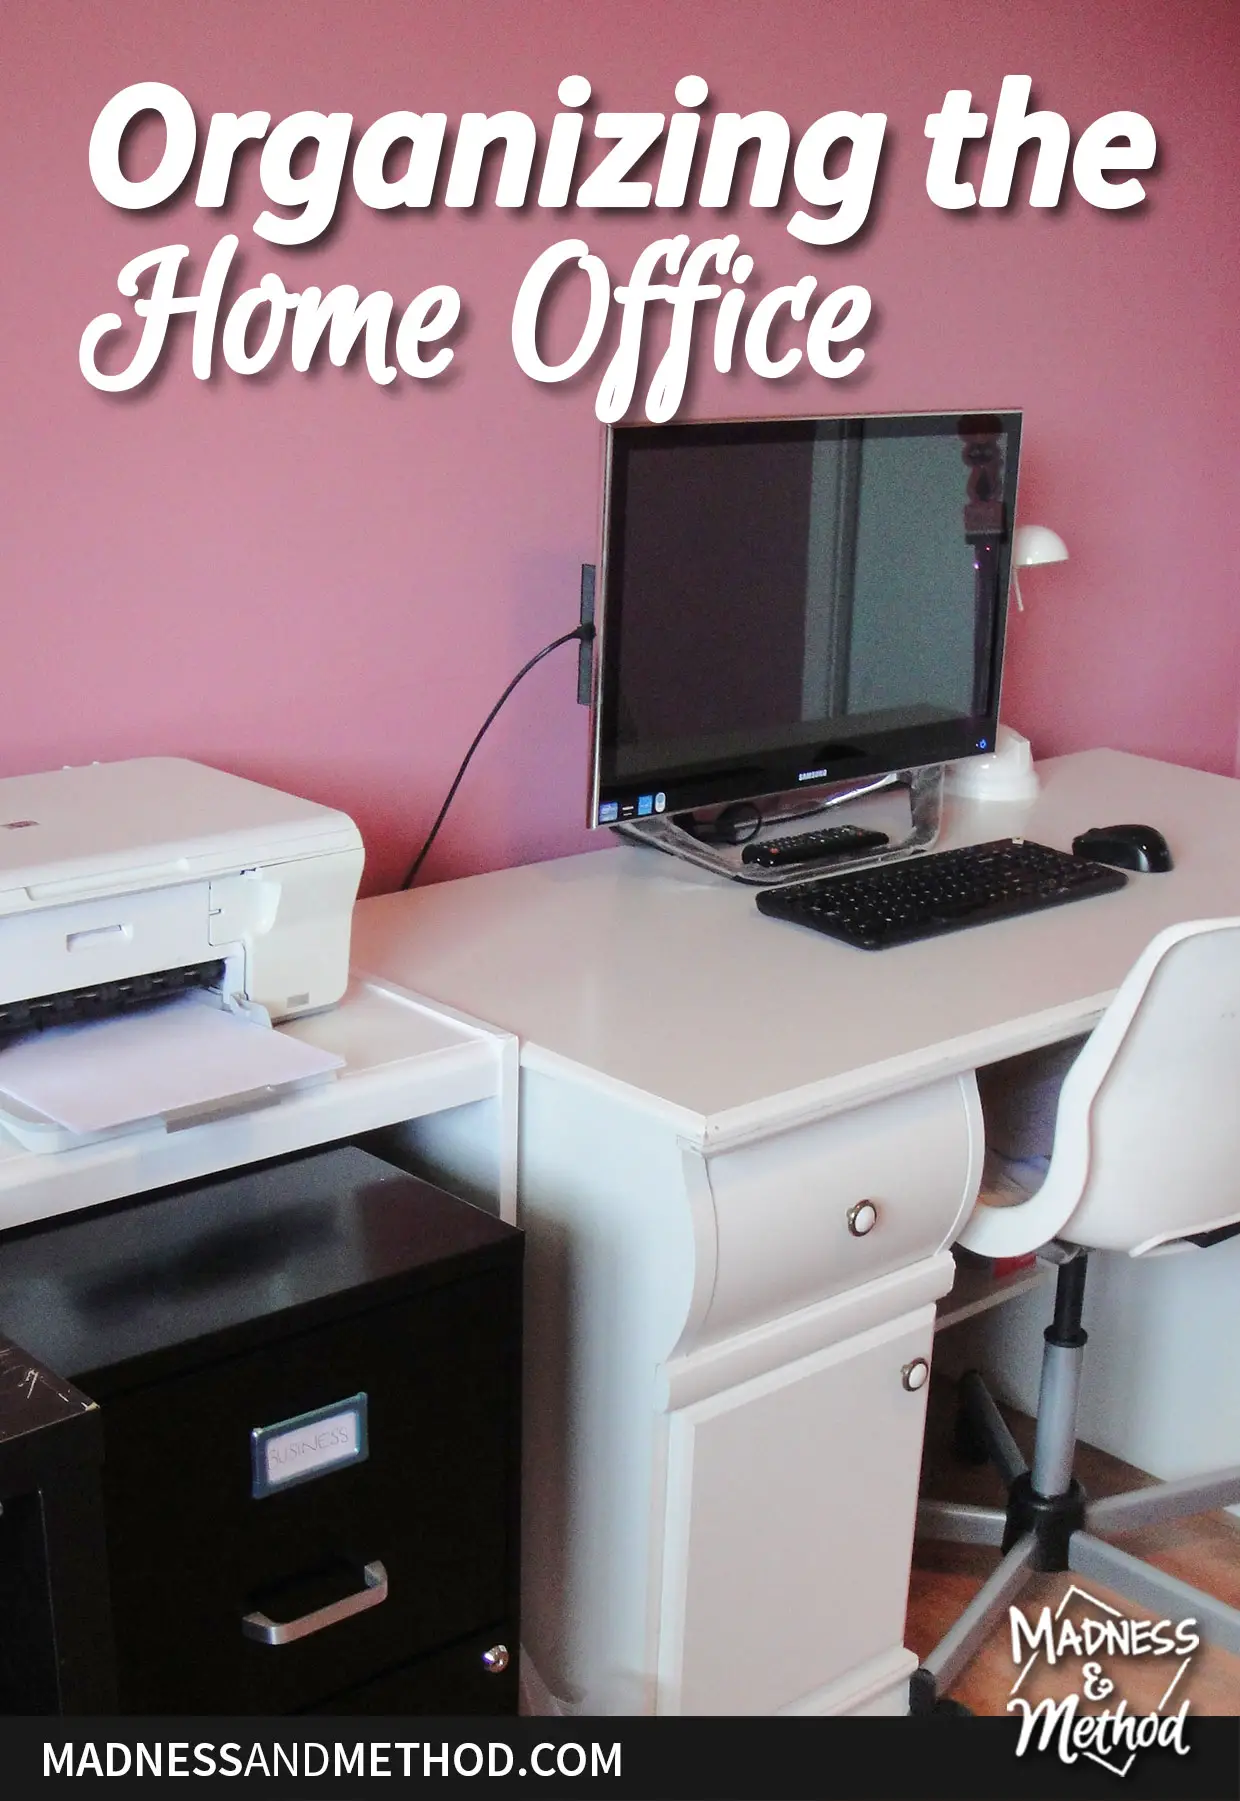 organizing the home office text overlay on pink walls with white desk